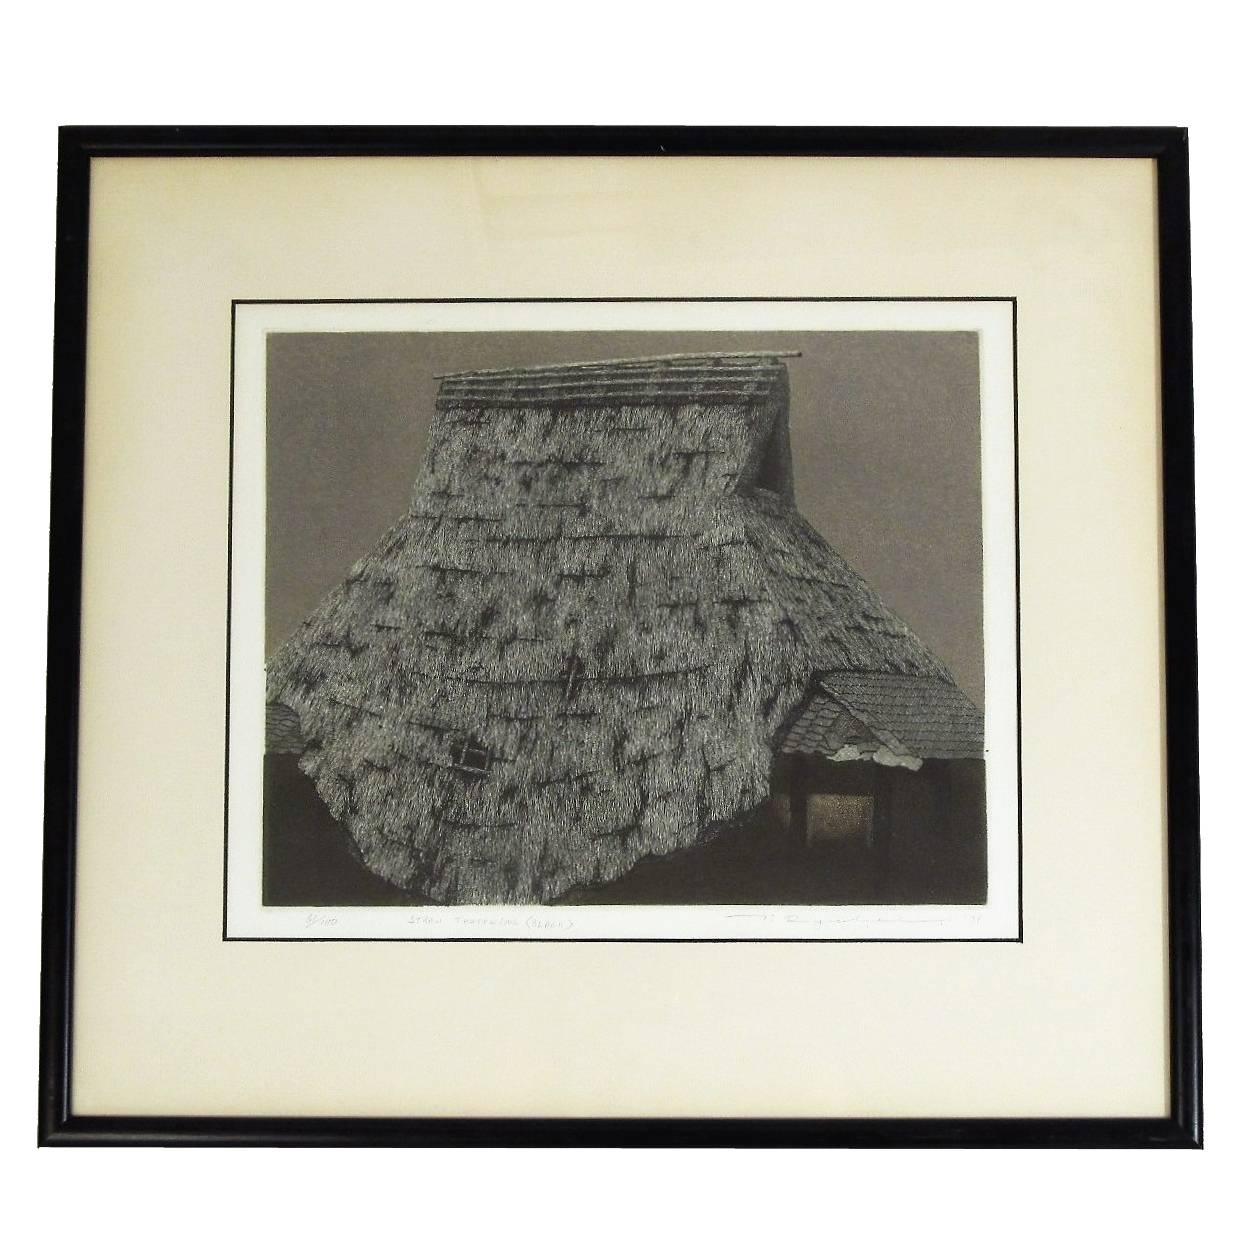 "Straw Thatching" 1971 Aquatint Etching by Tanaka Ryohei For Sale